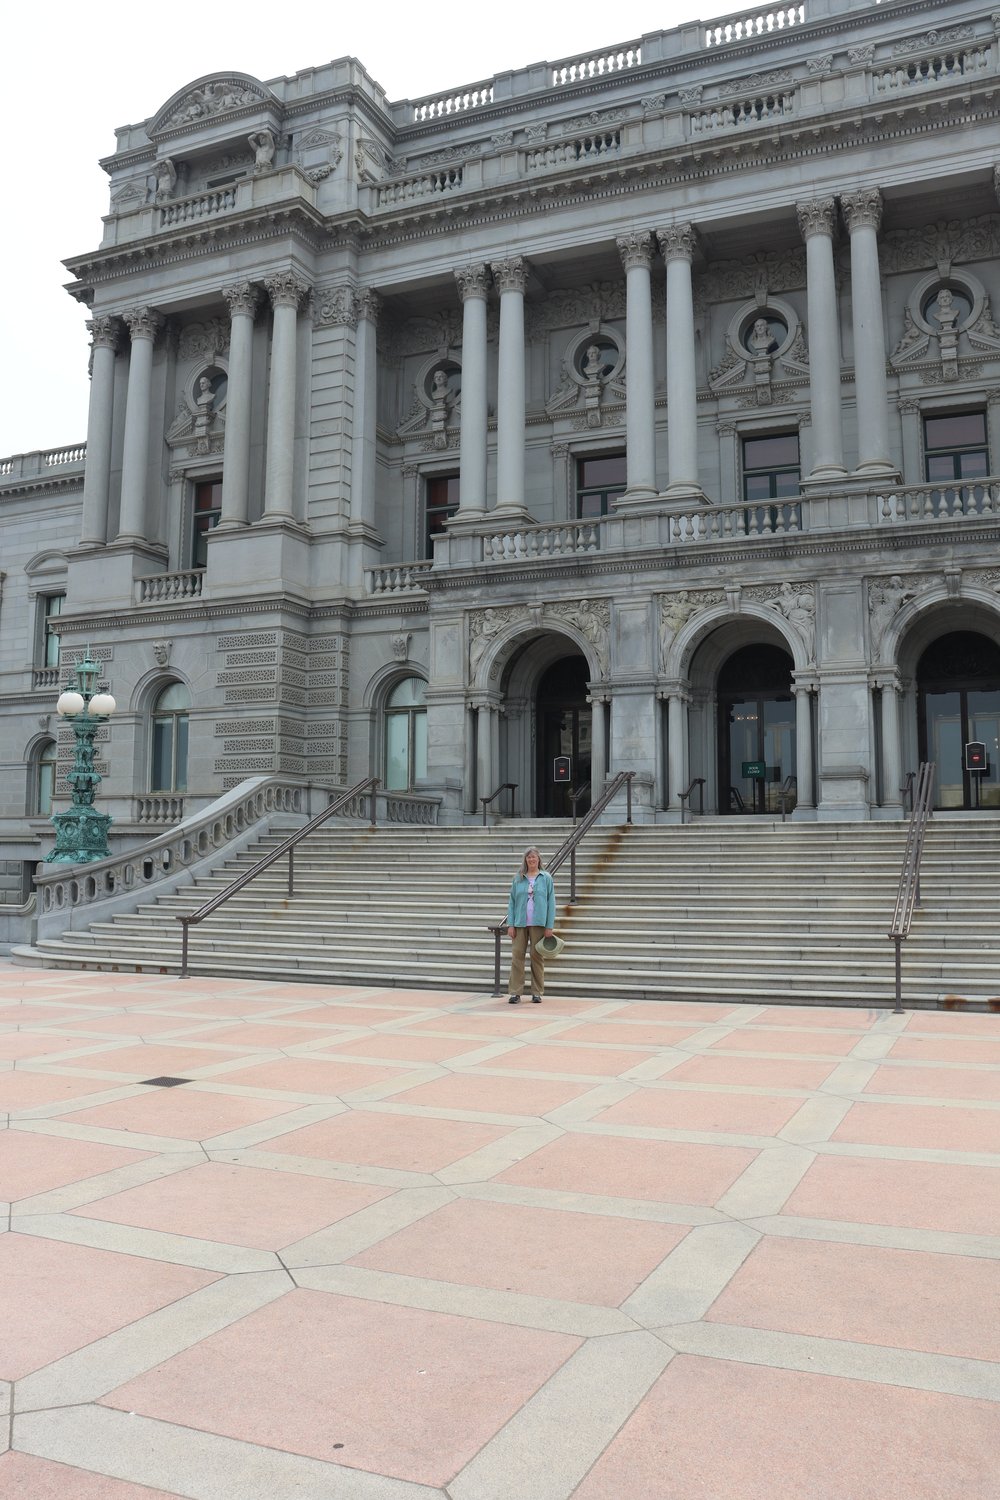 Mavis in front of the Library of Congress.